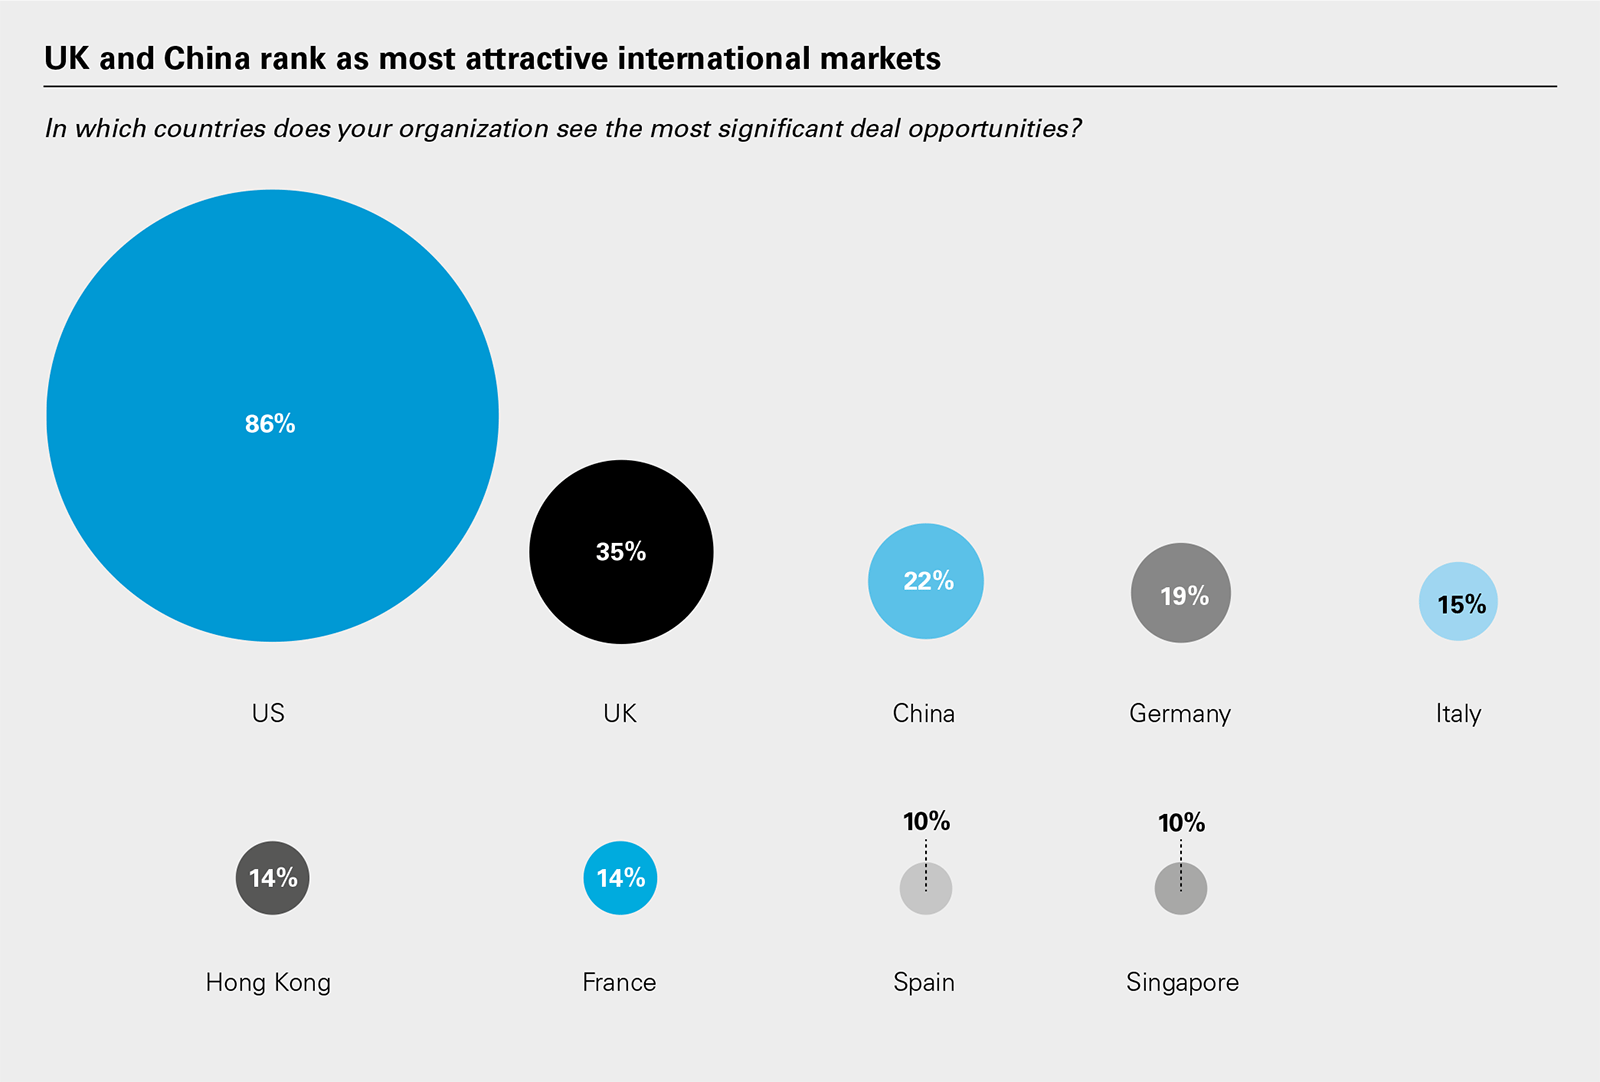 UK and China rank as most attractive international markets